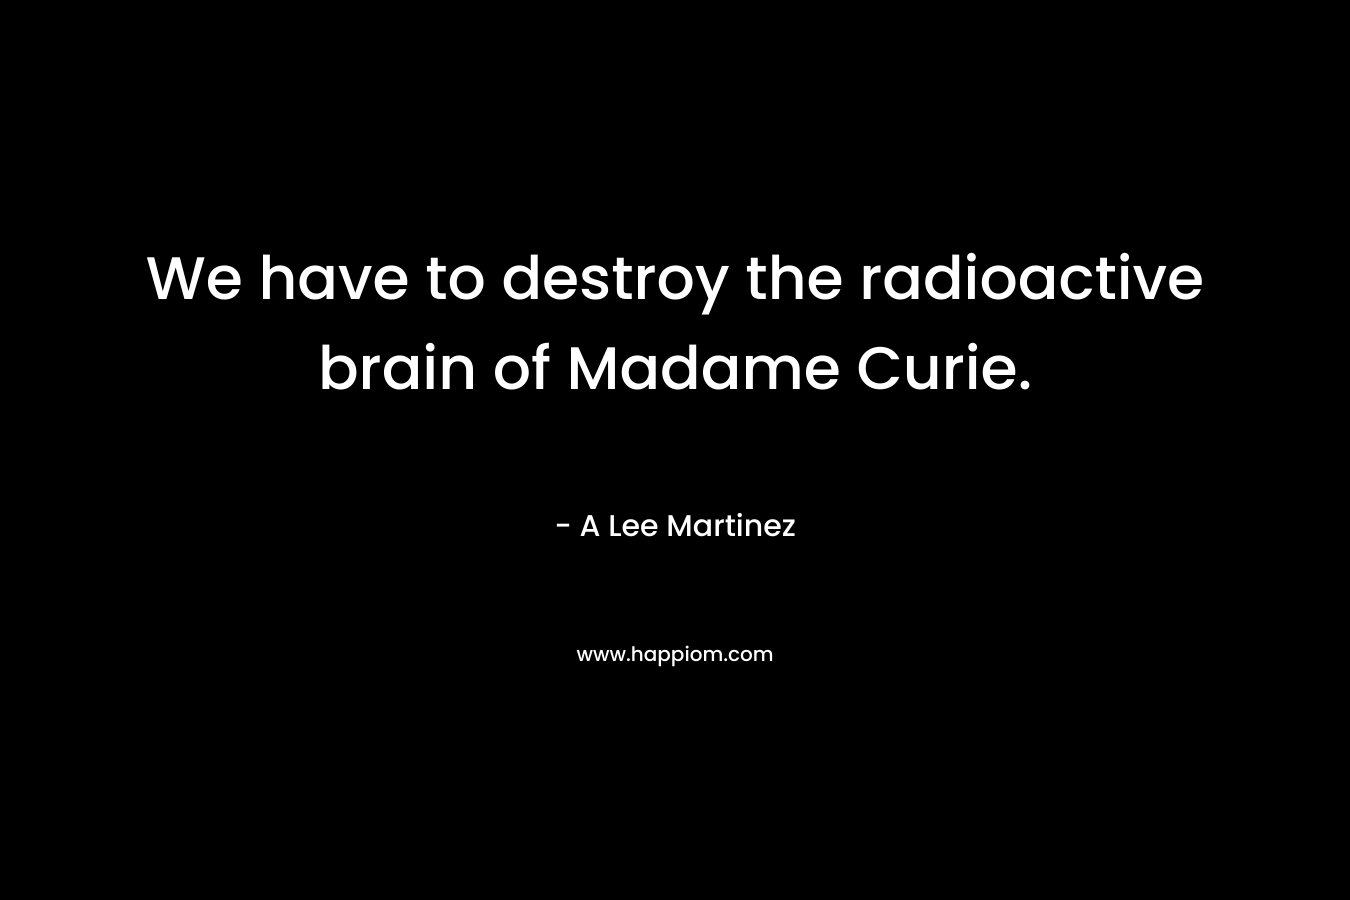 We have to destroy the radioactive brain of Madame Curie.